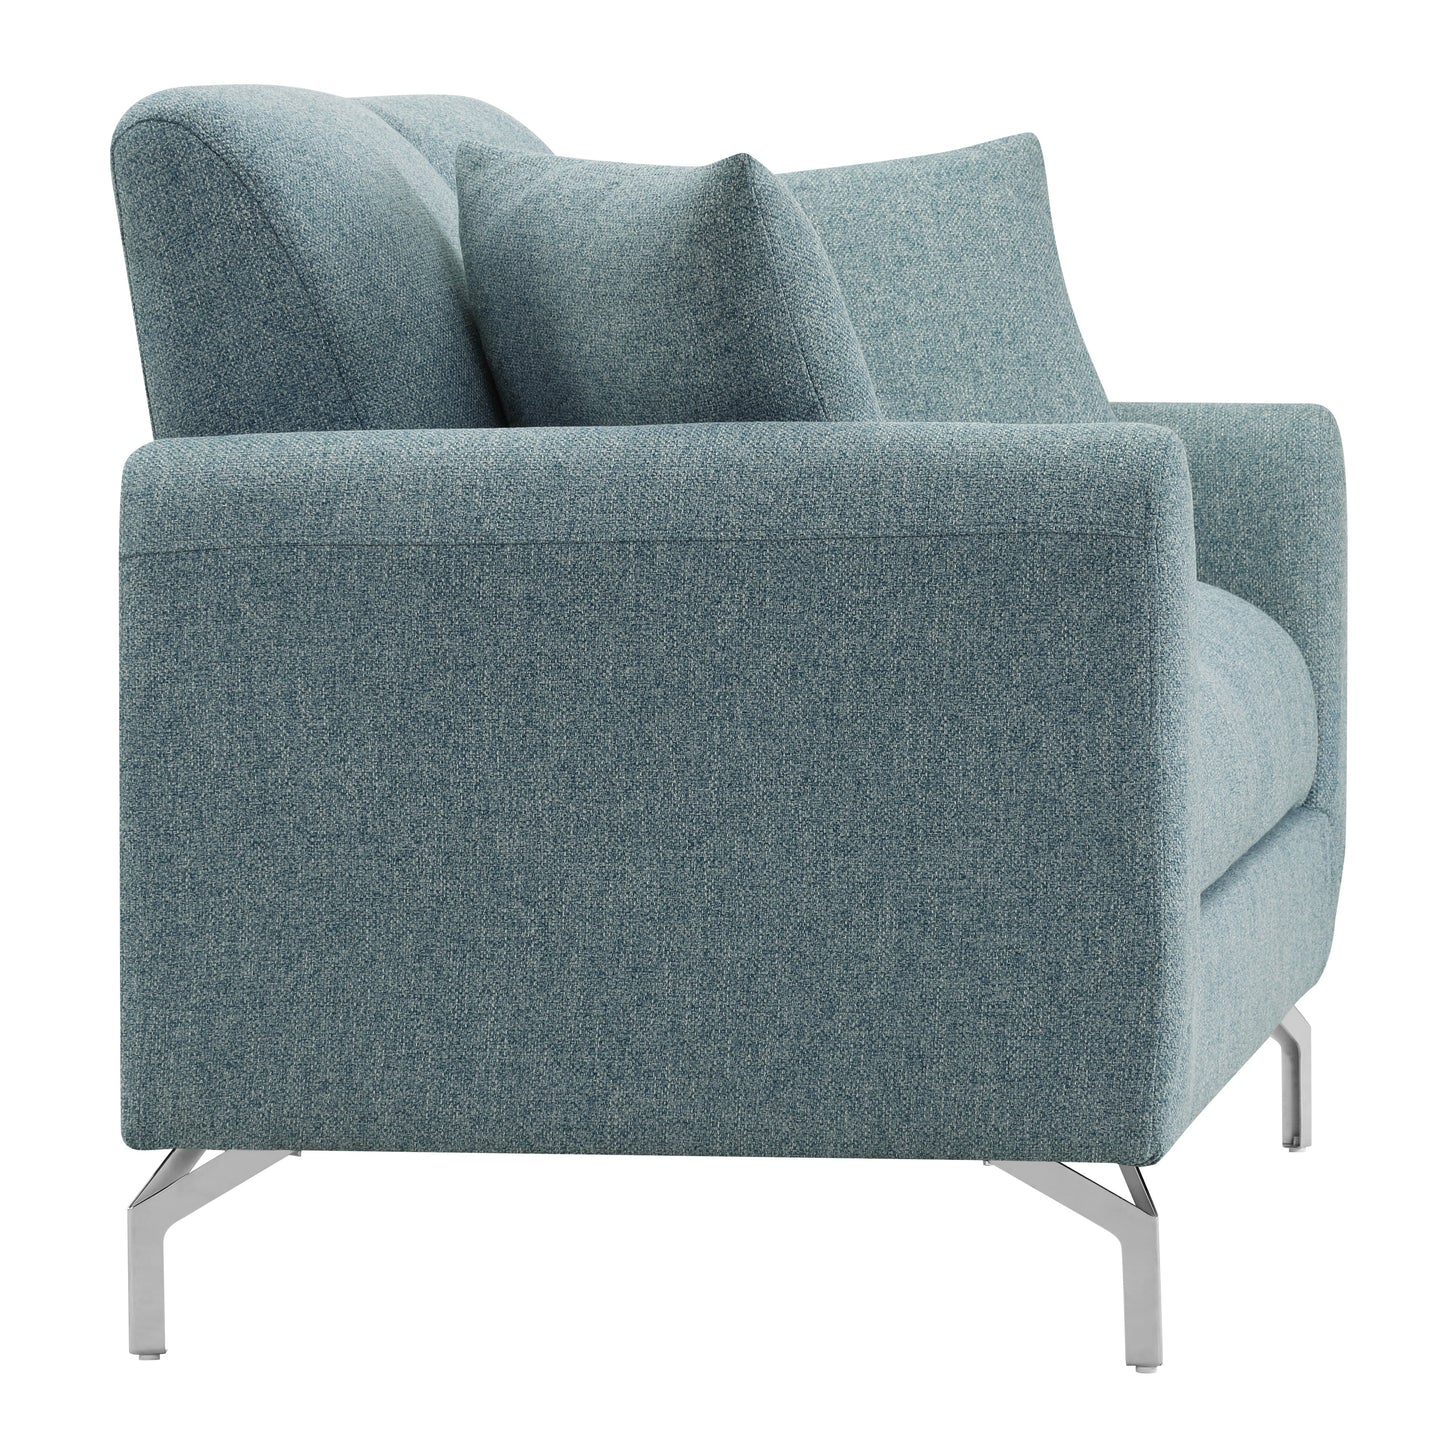 Noreen Contemporary Blue Fabric Rounded Arm Loveseat